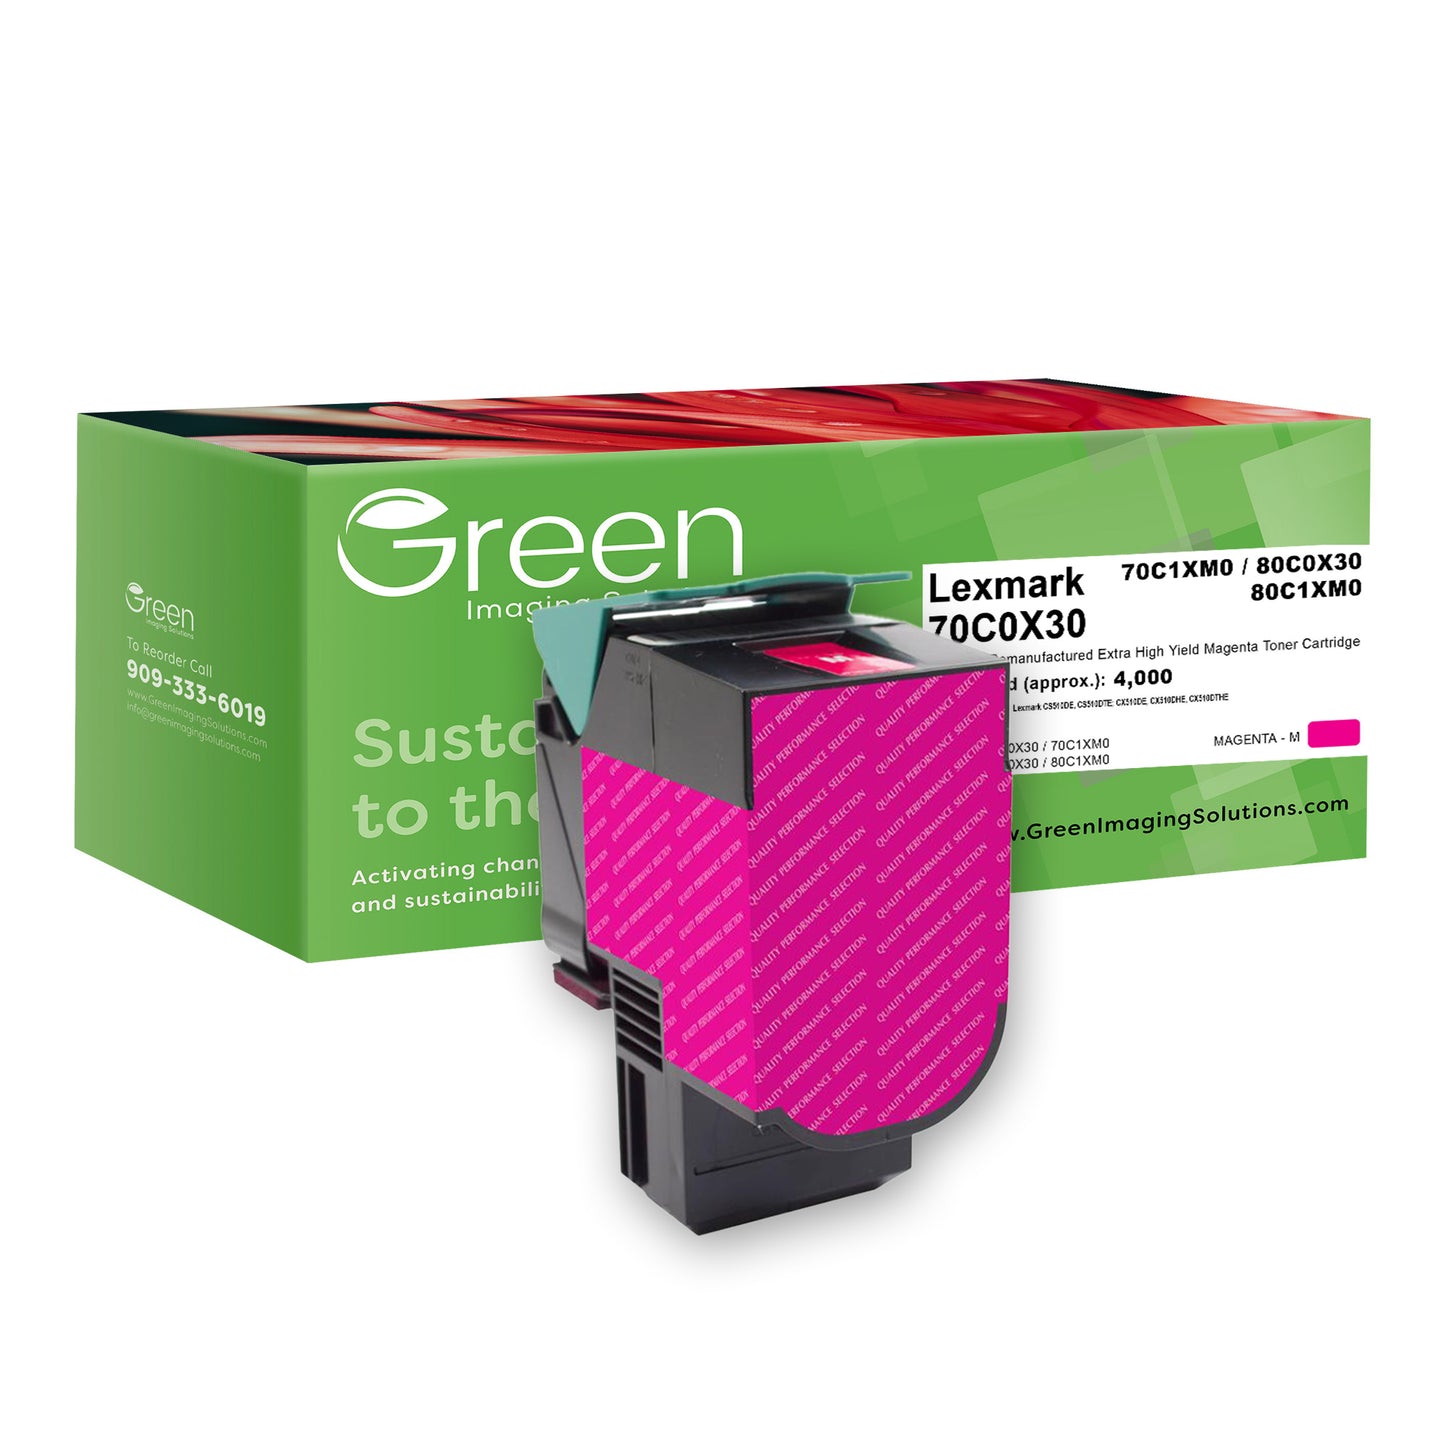 Green Imaging Solutions USA Remanufactured Extra High Yield Magenta Toner Cartridge for Lexmark CS510